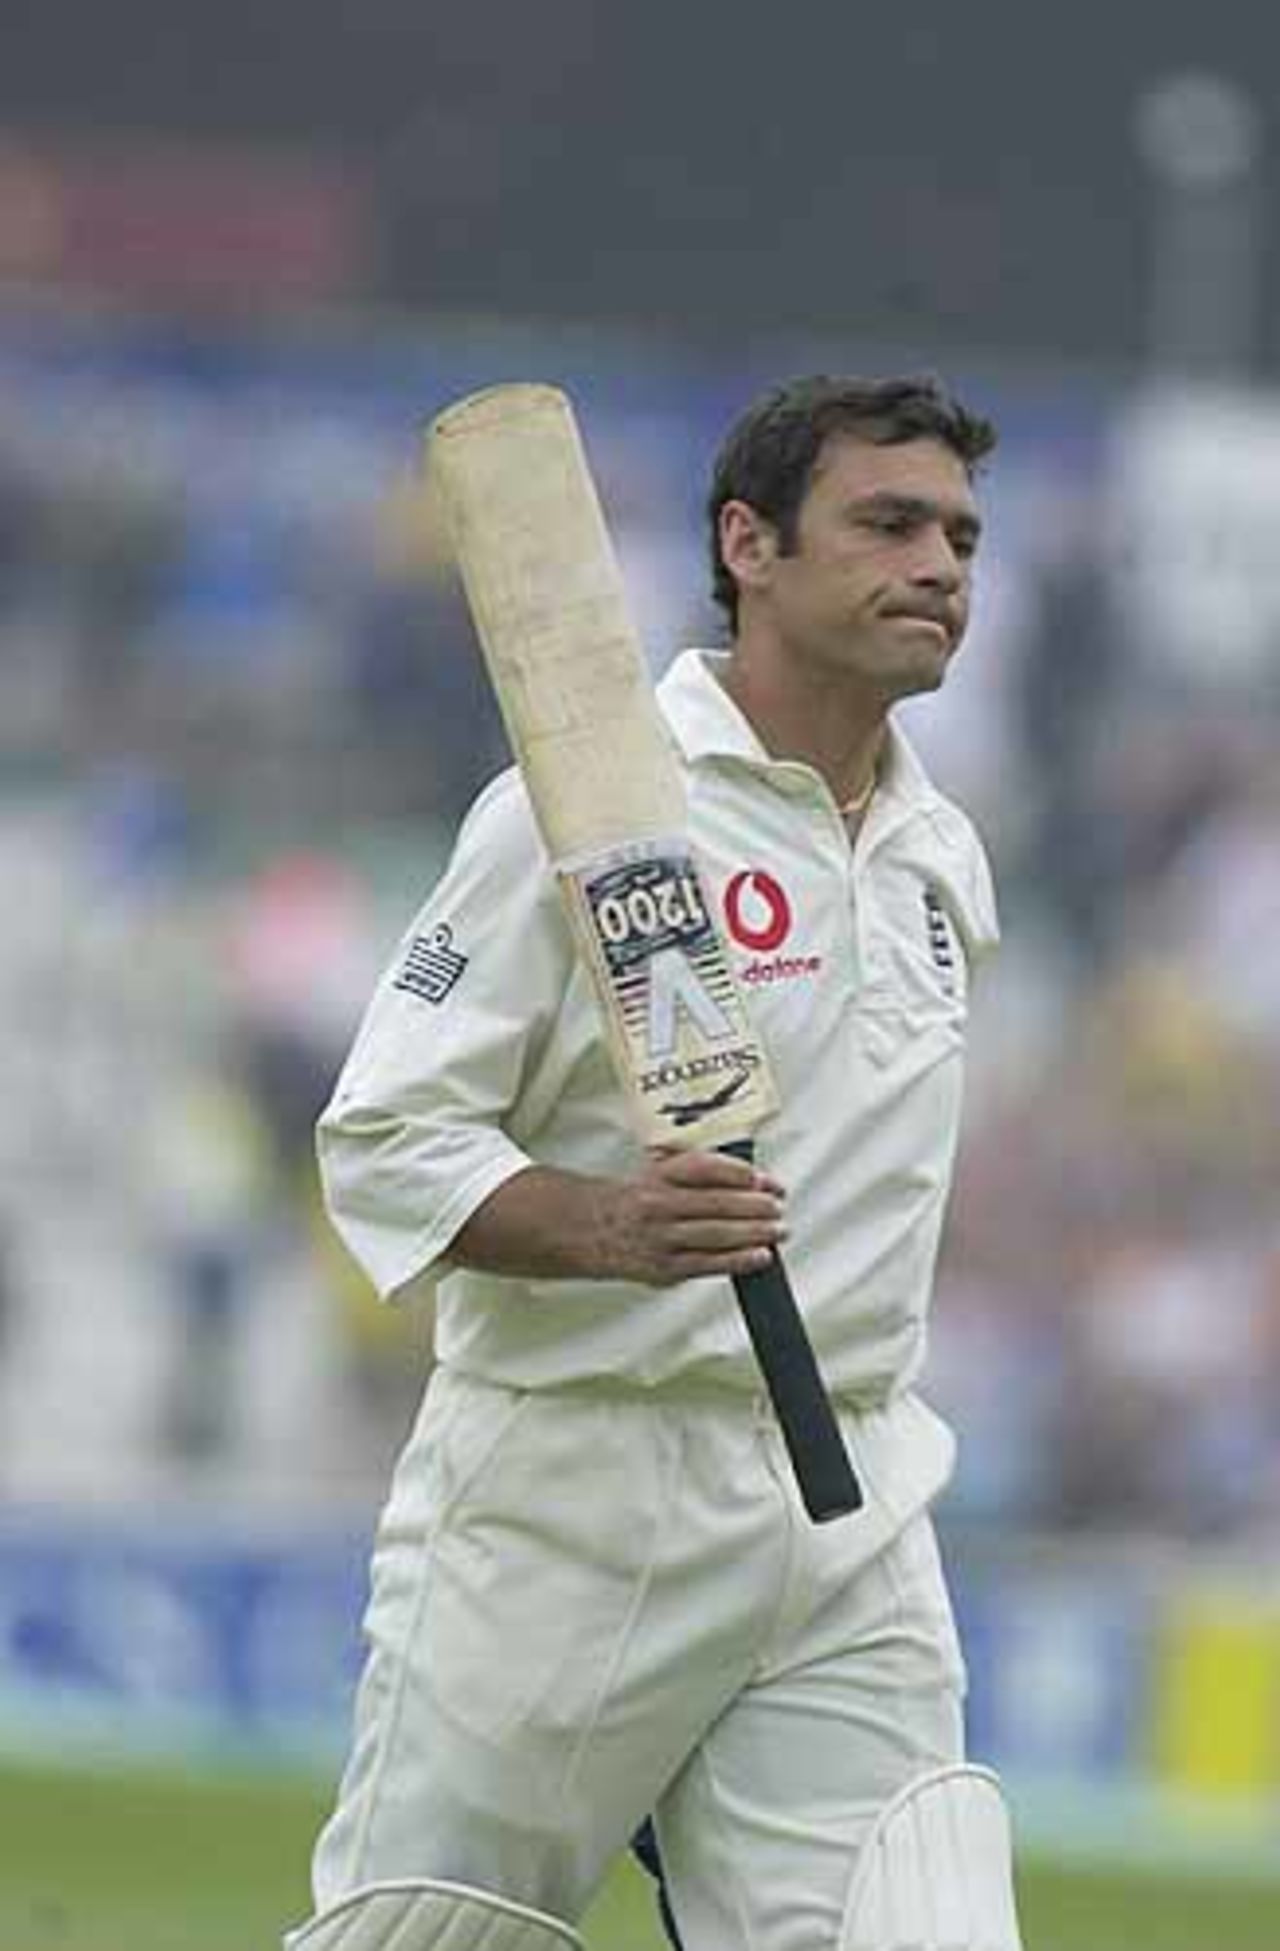 Mark Ramprakash's innings comes to a close at a score of 133, fifth npower Test, Day 4, The Oval, 26 August 2001